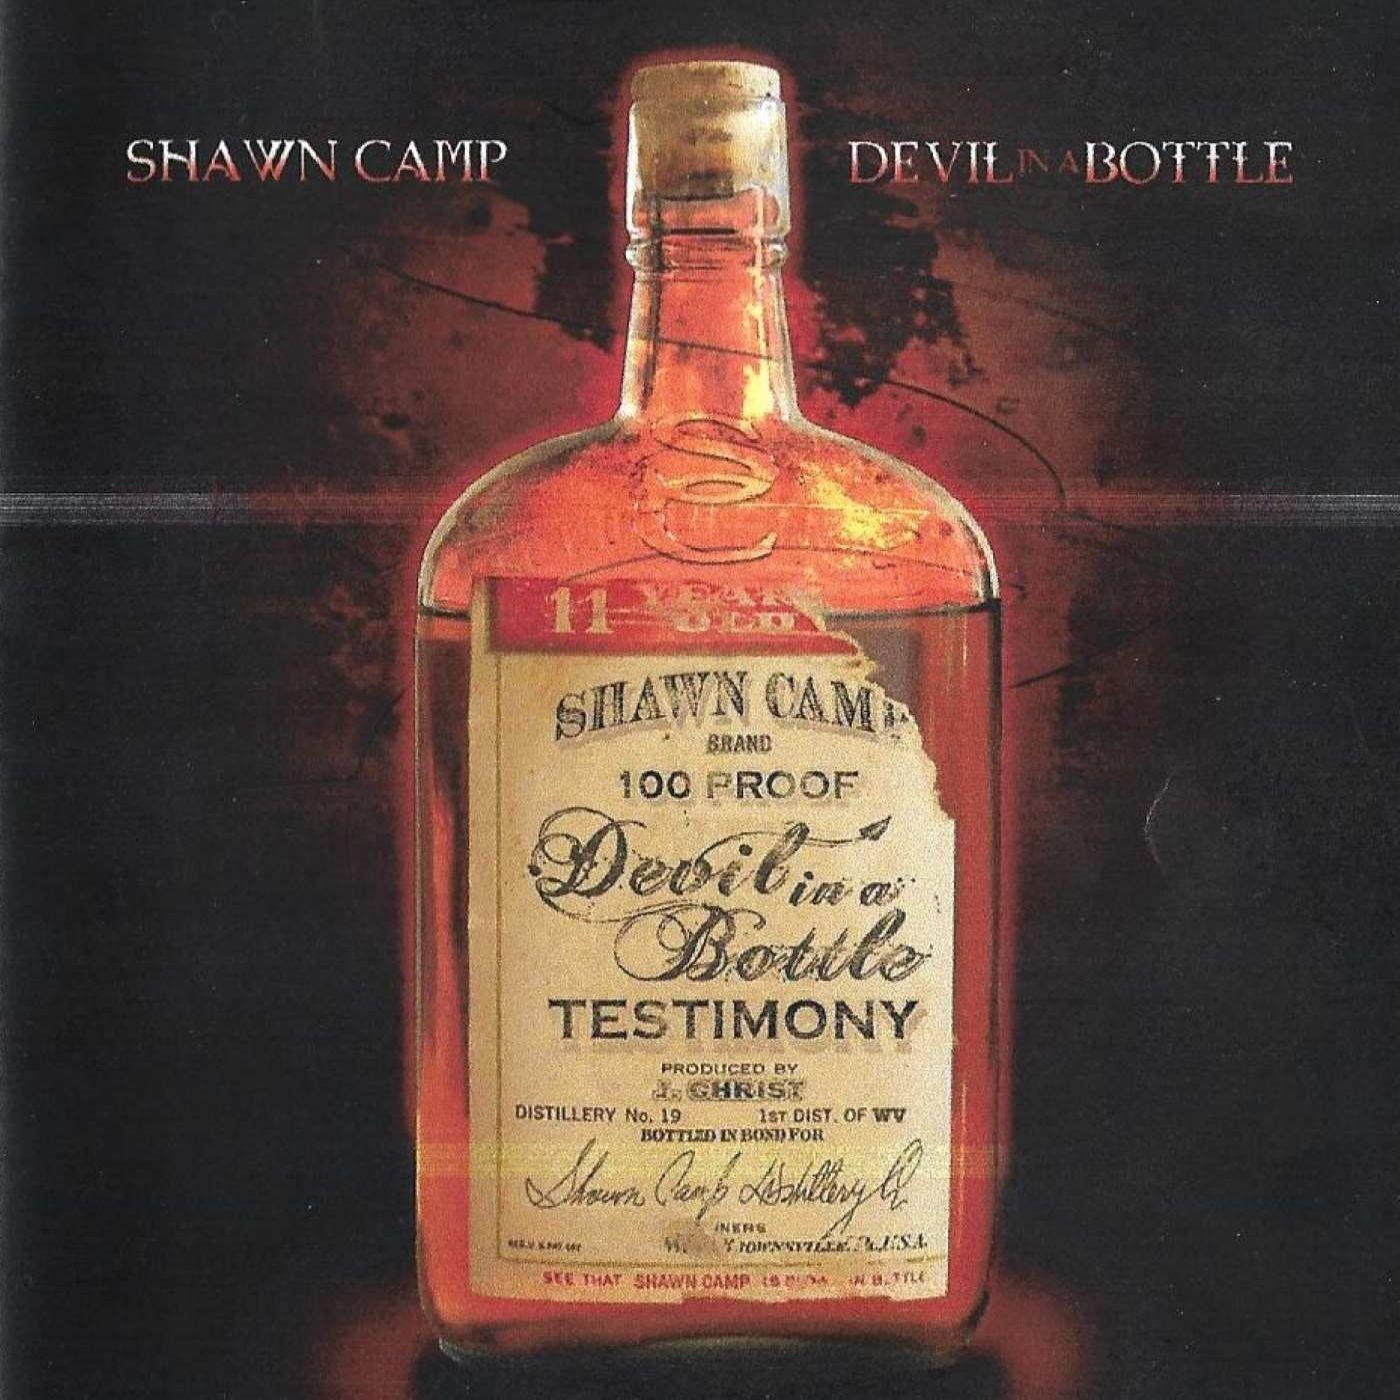 Shawn Camp - The Beer the Bourbon the Bible